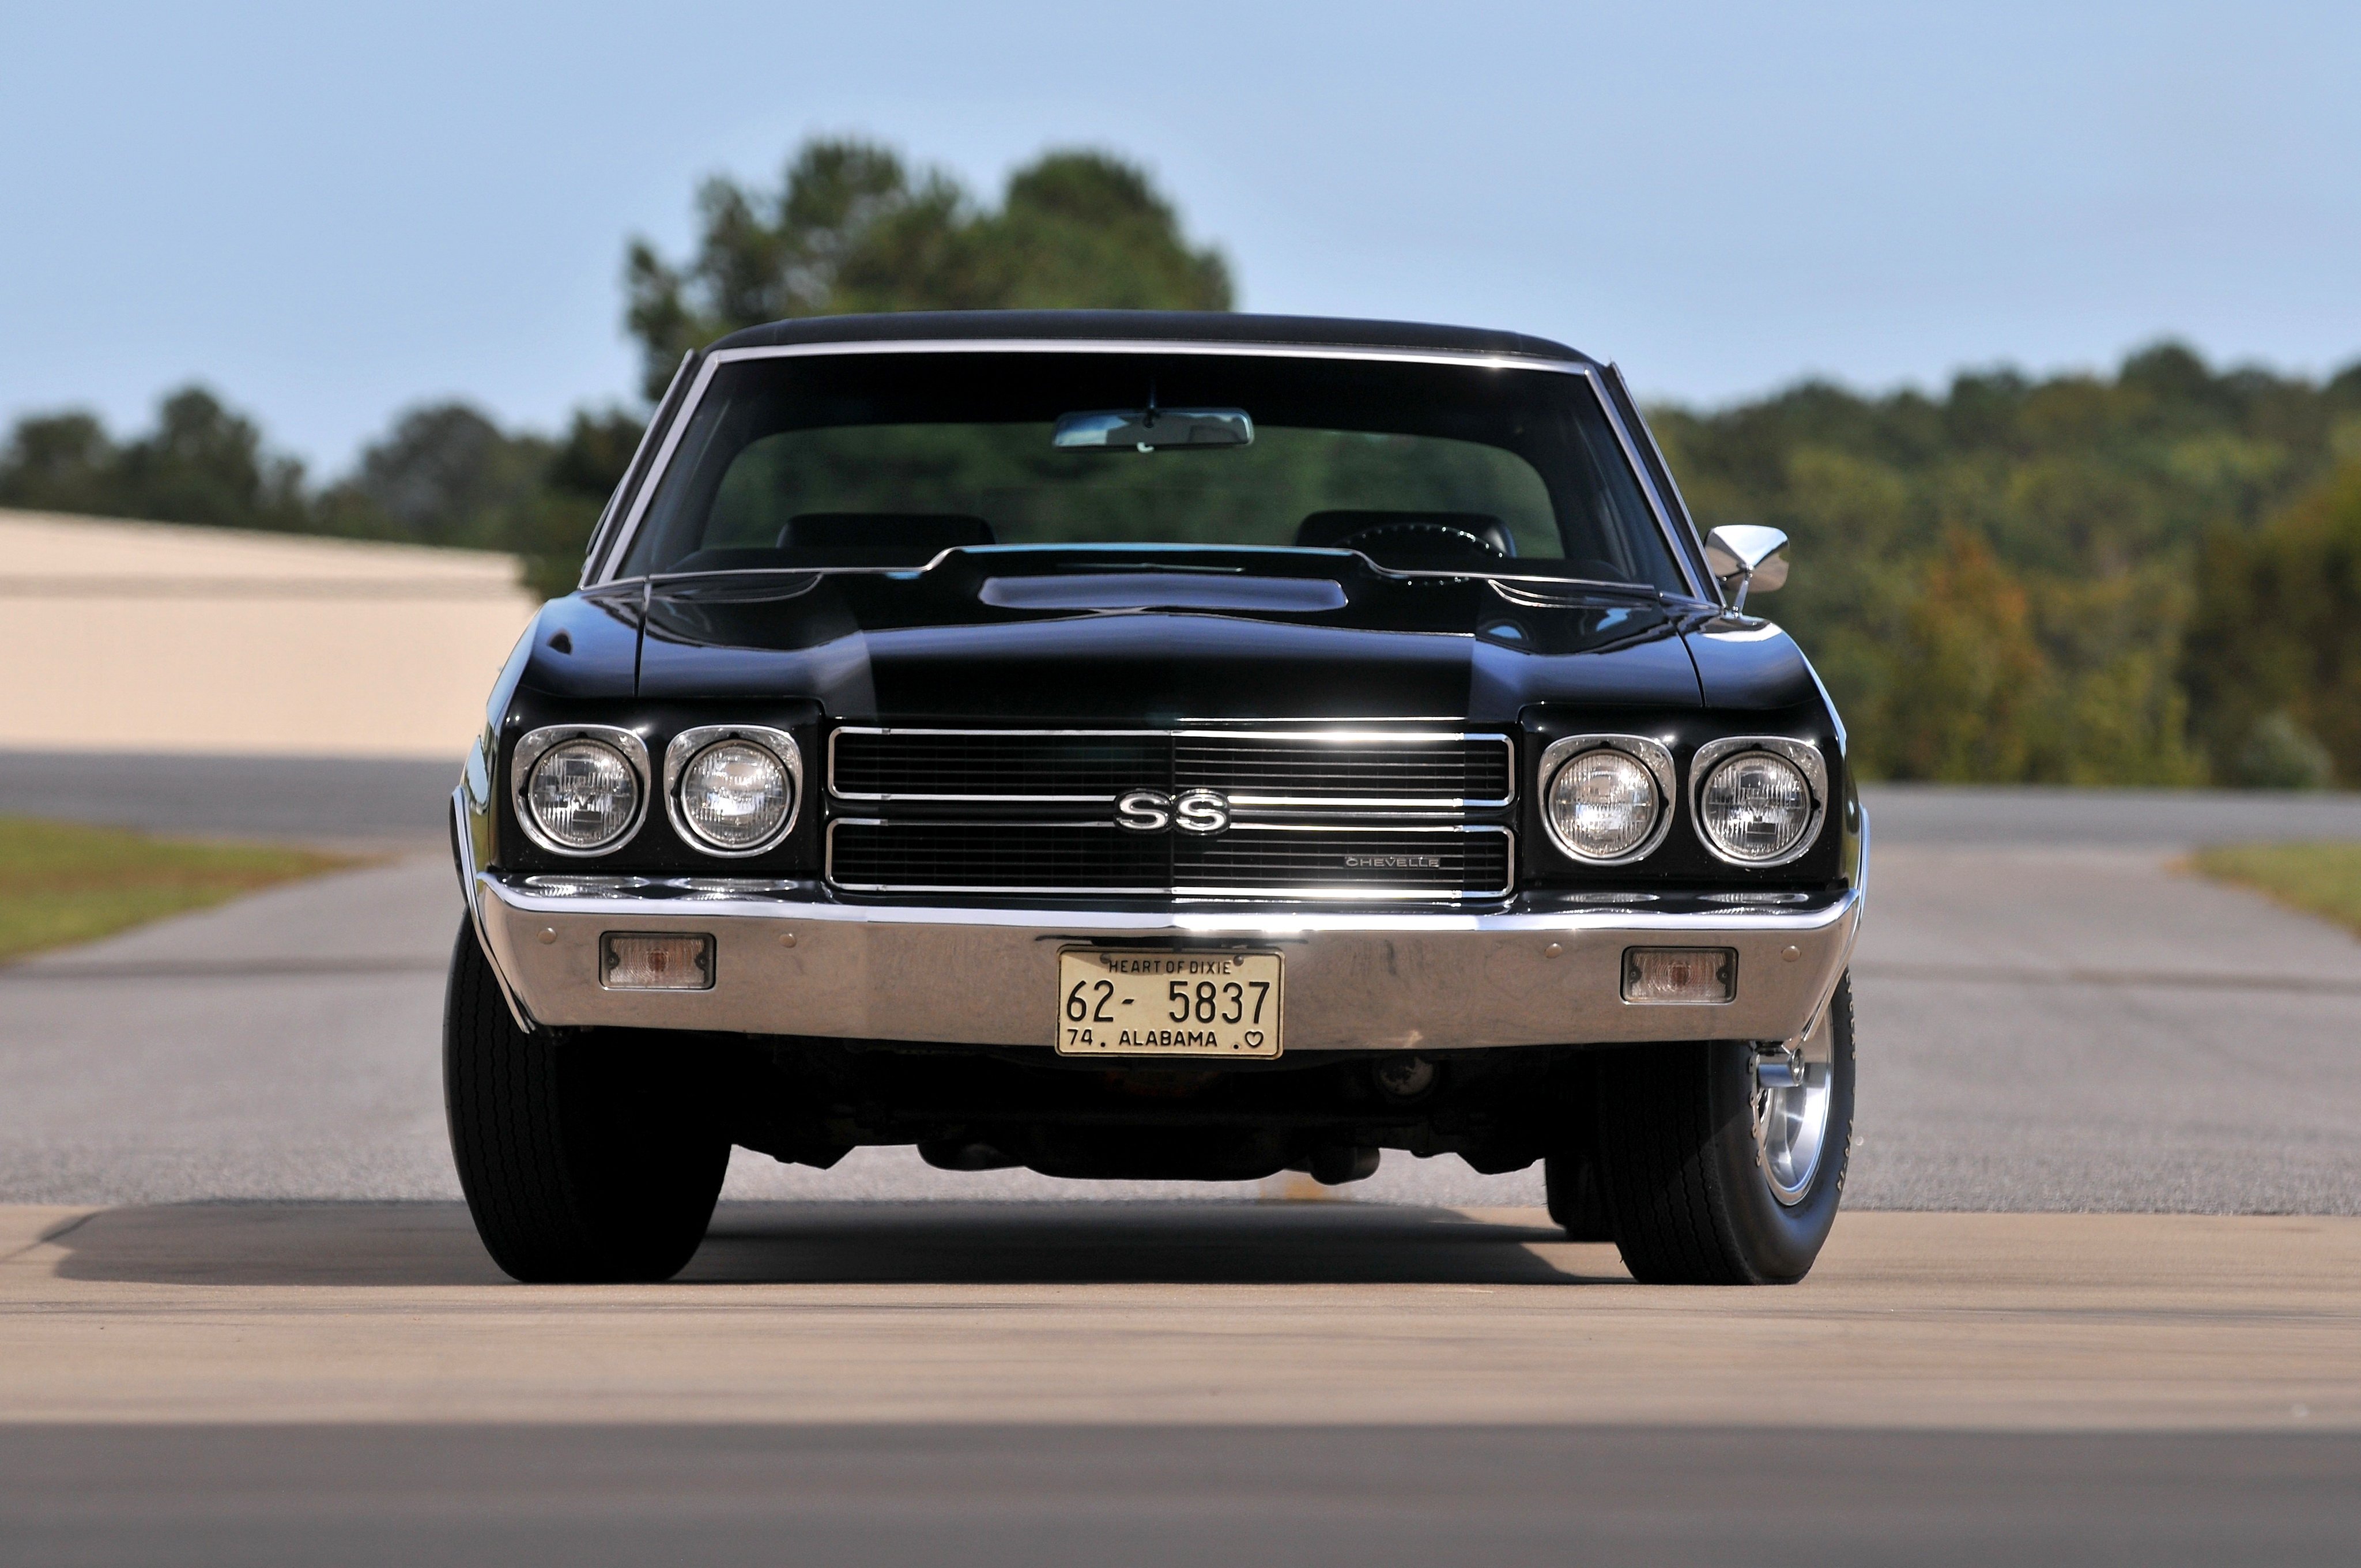 1970 Chevrolet Chevelle S S 454 LS6 Hardtop Coupe muscle classic 4096x2720